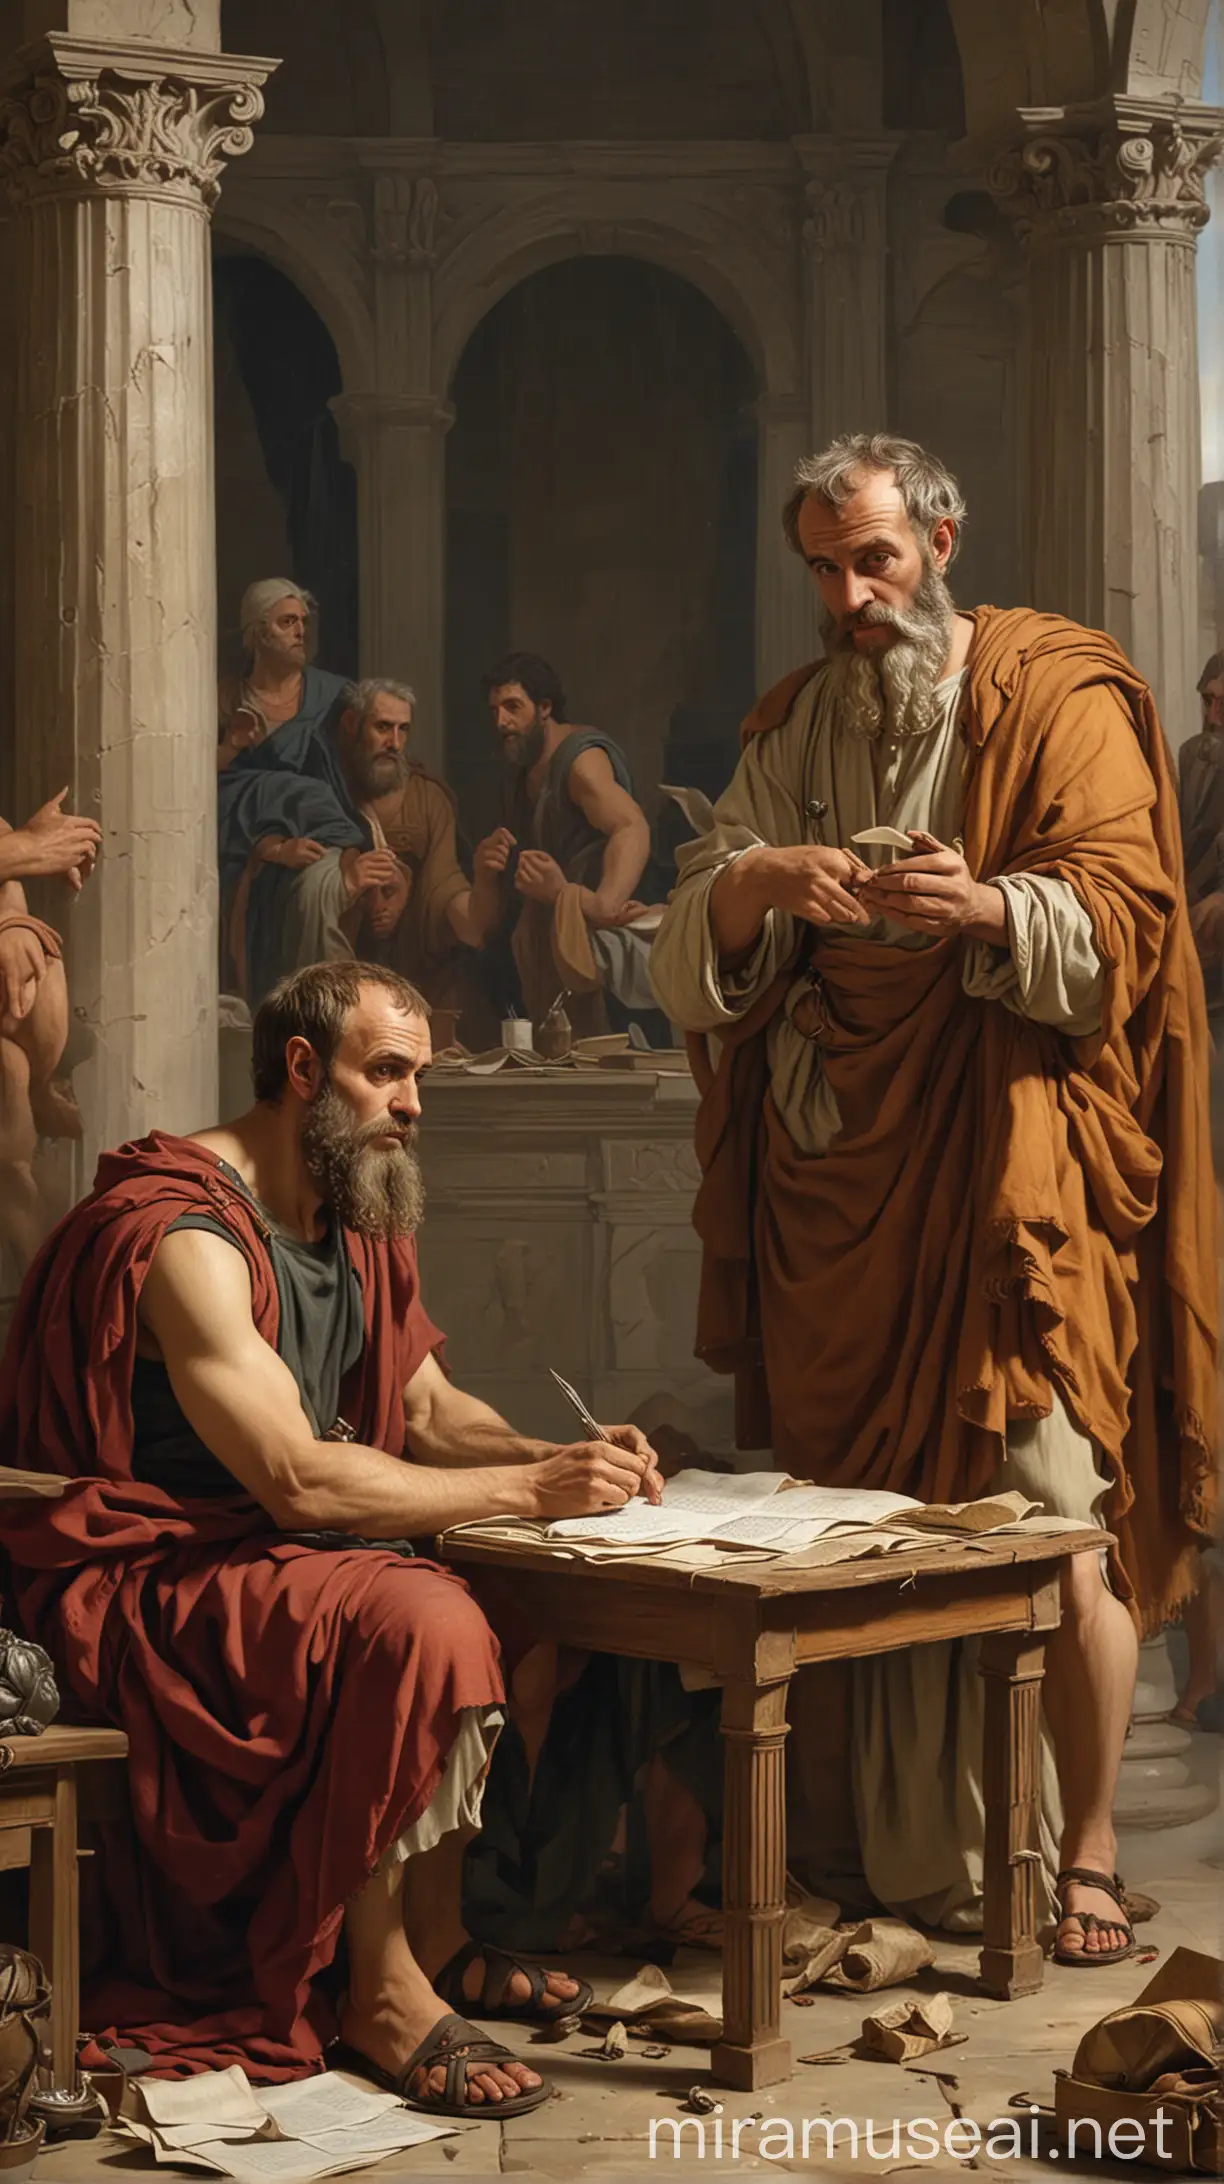 A concerned Apostle Paul writing a letter, with Philetus and Hymenaeus in the background discussing amongst themselves.In ancient world 